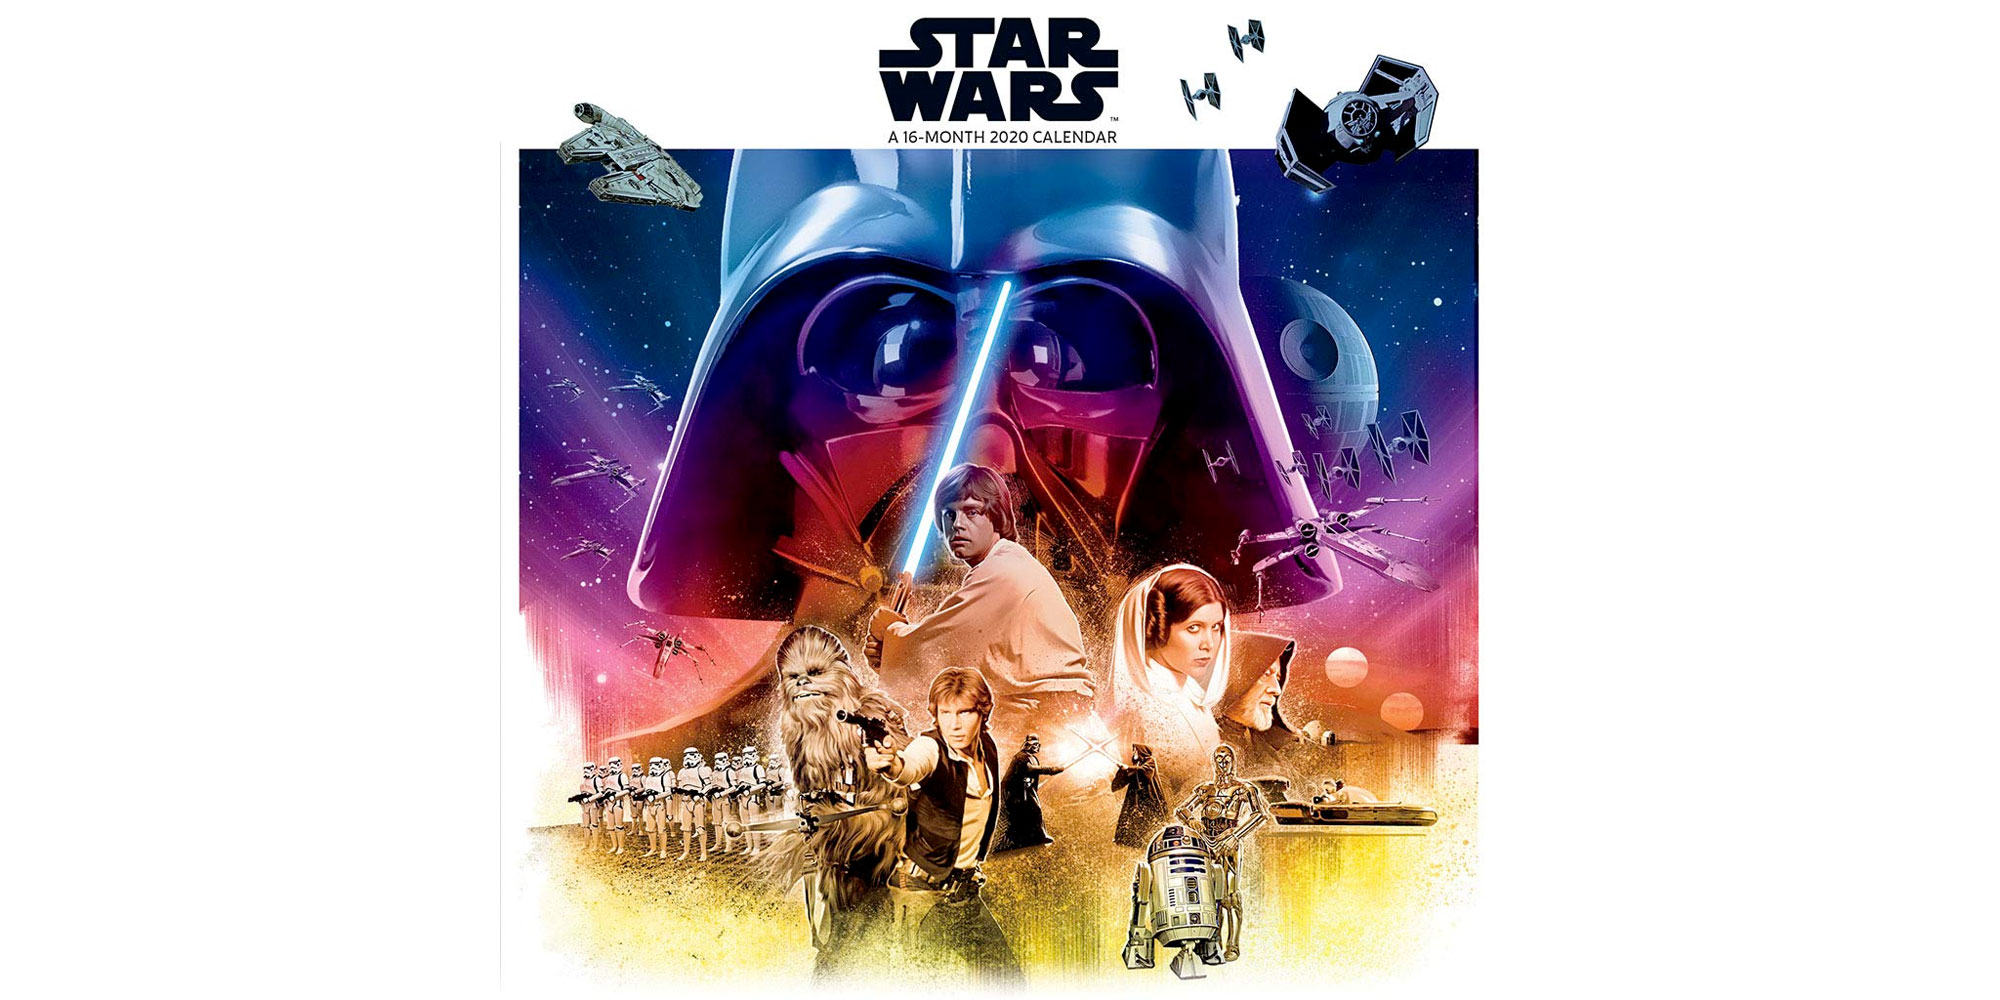 The official Star Wars 2020 wall calendar is at an all-time low of $5